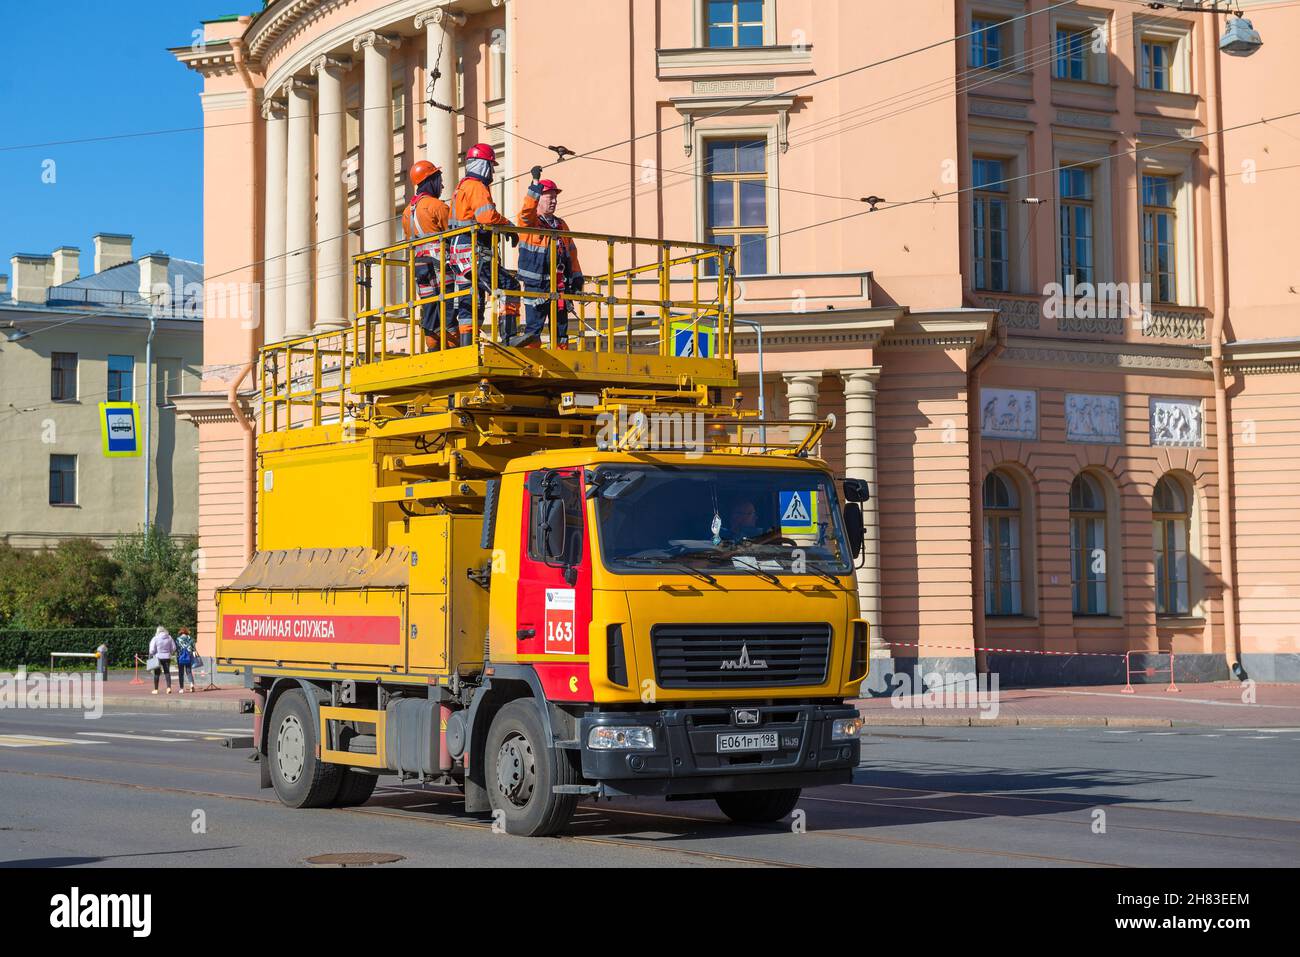 SAINT PETERSBURG, RUSSIA - SEPTEMBER 05, 202: A team of workers on the car of the city electric transport emergency service Stock Photo